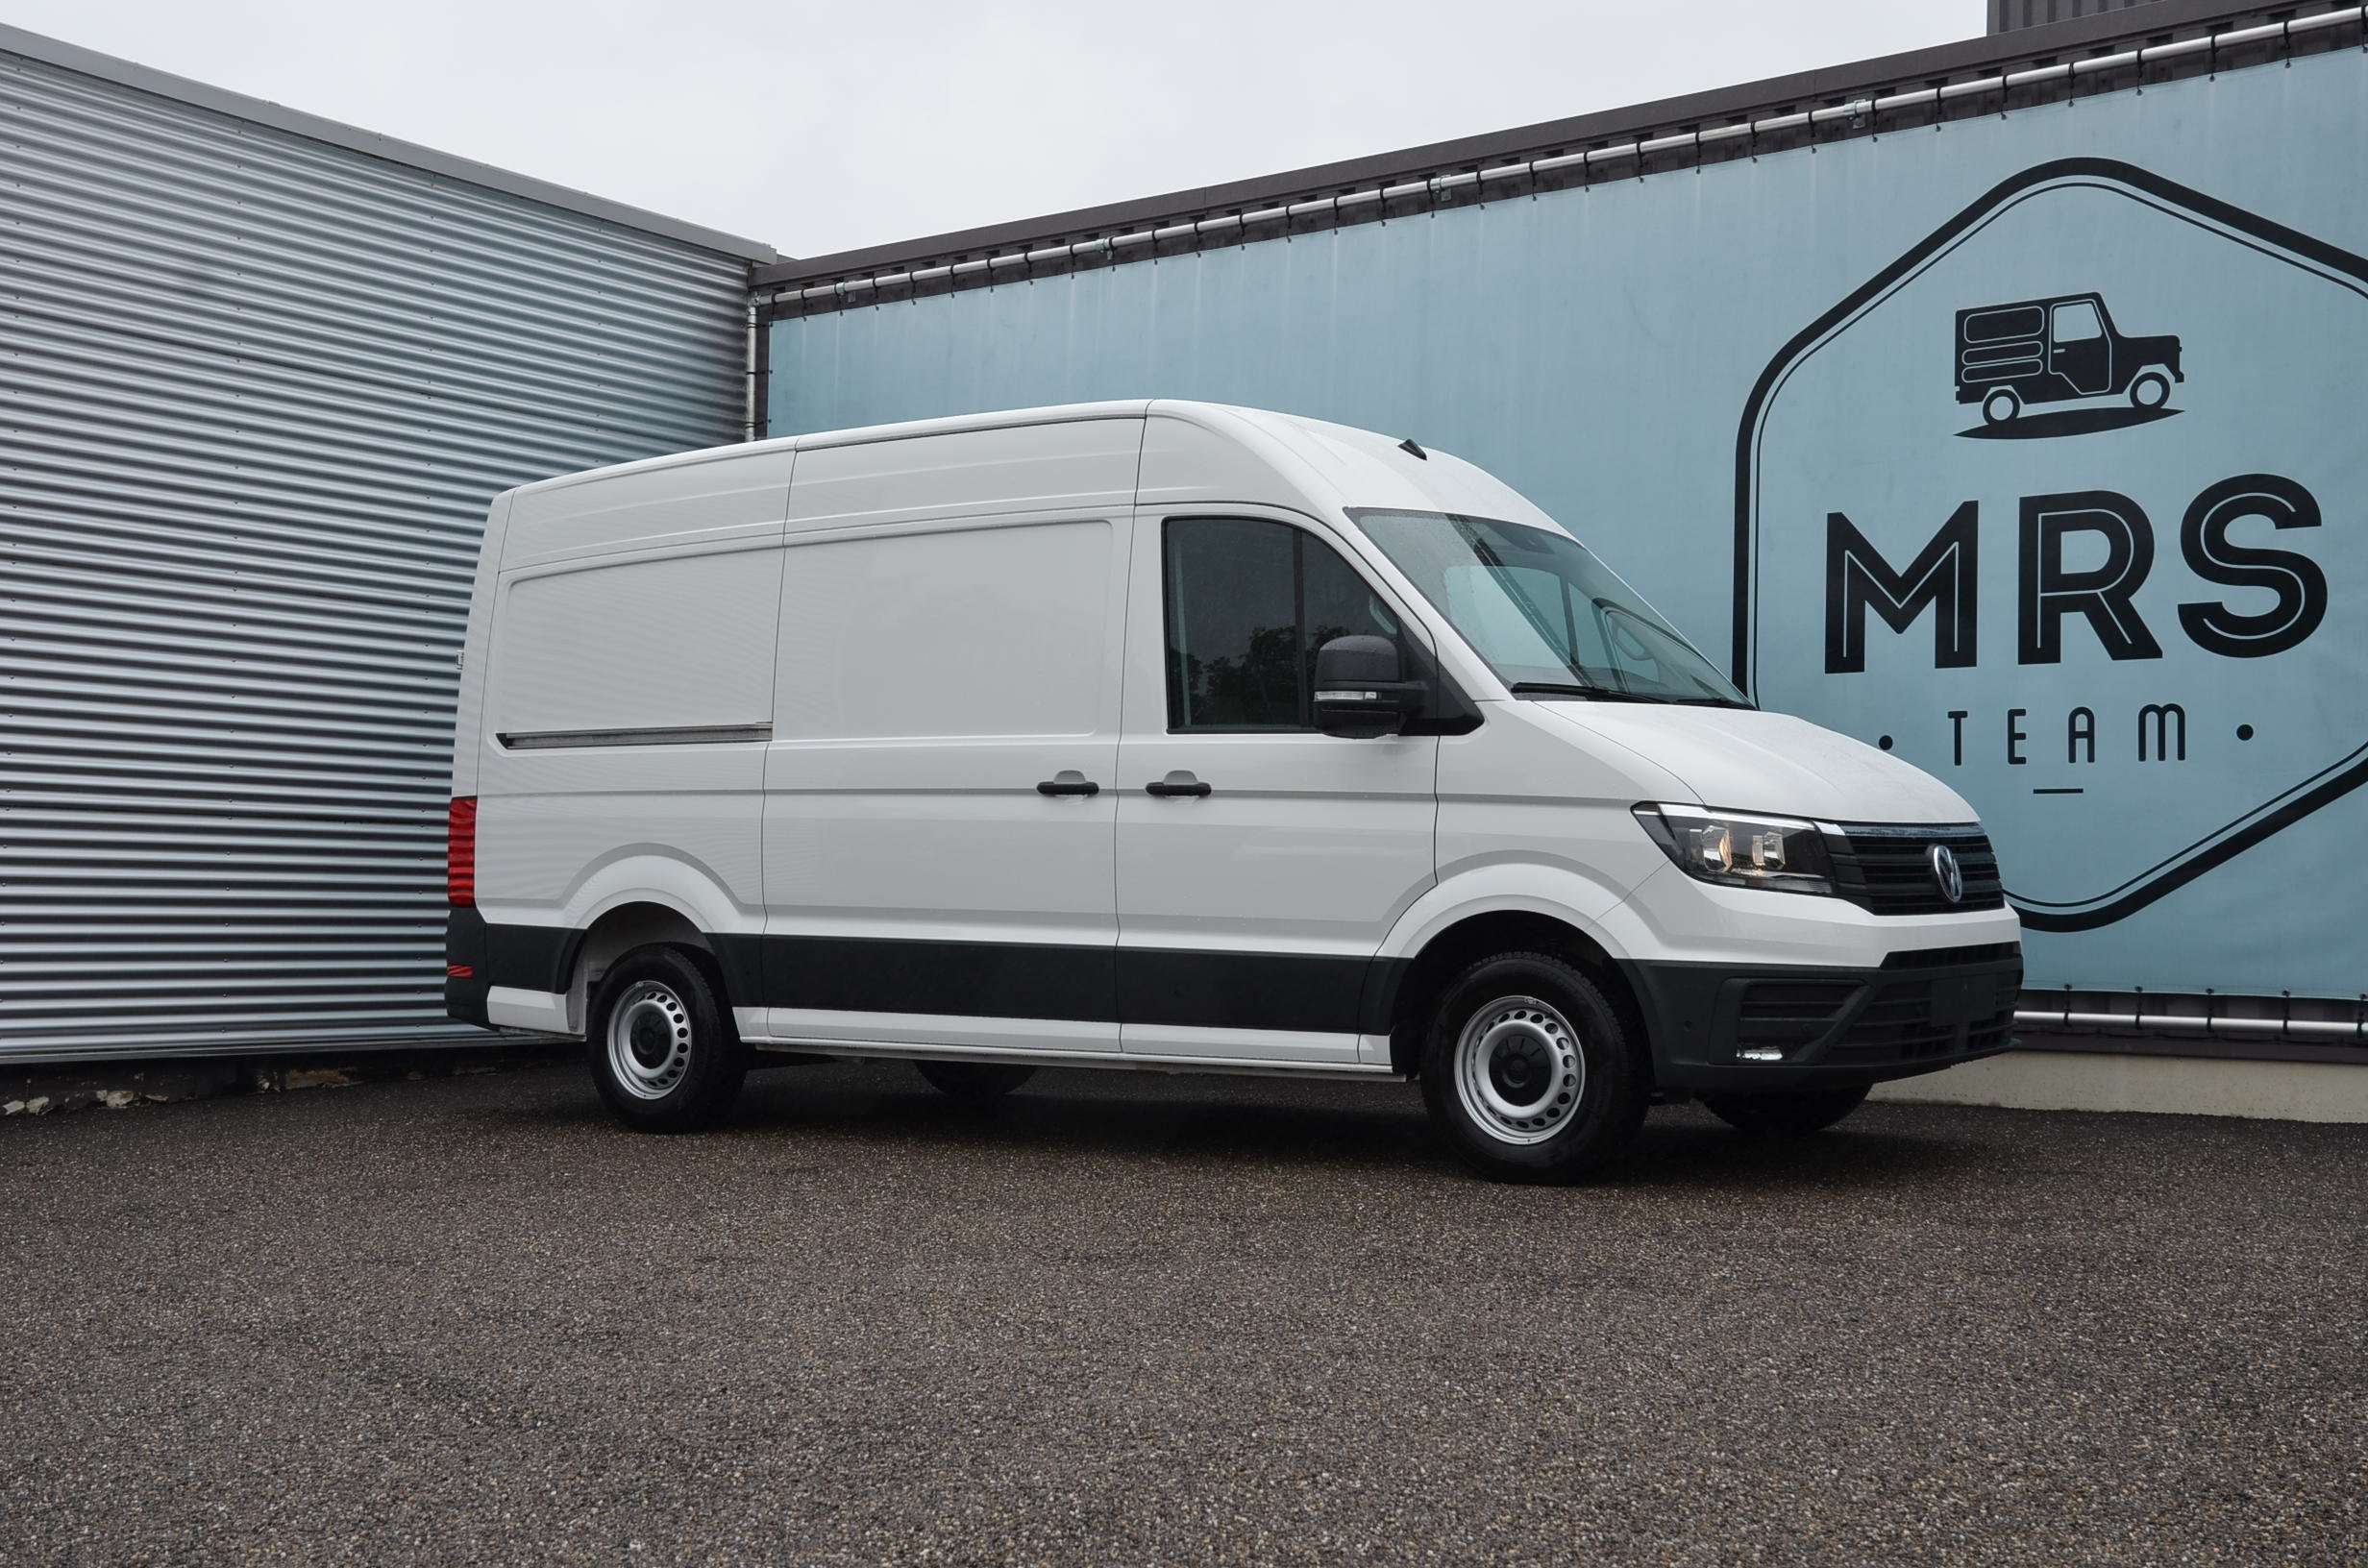 Volkswagen Crafter Transporter in White used in Houthalen for € 52,998.-